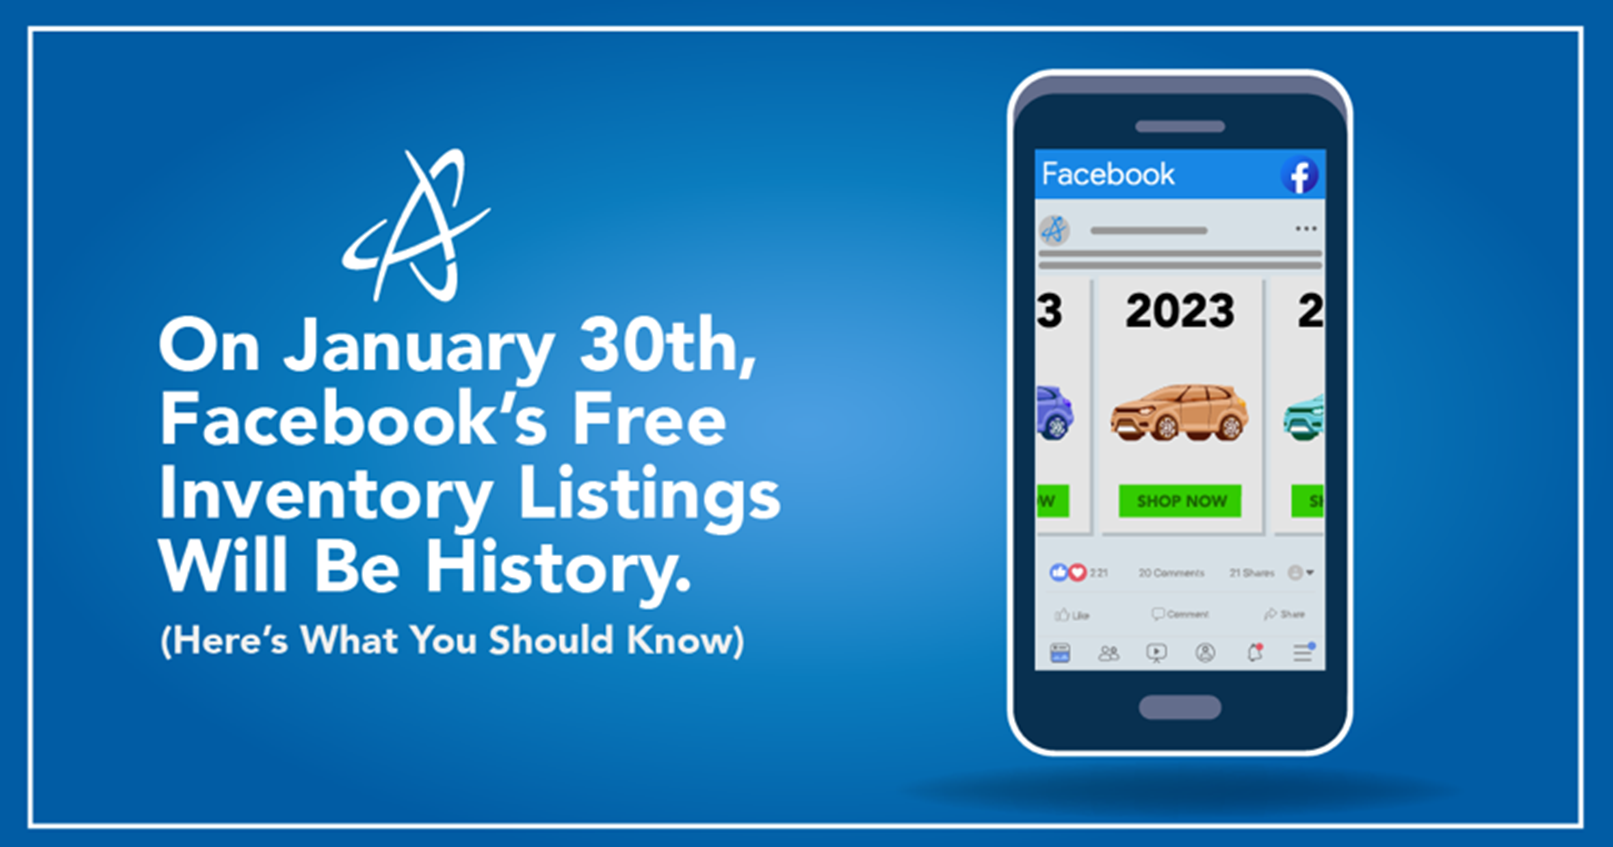 On January 30th, Facebook's Free Inventory Listings Will Be History